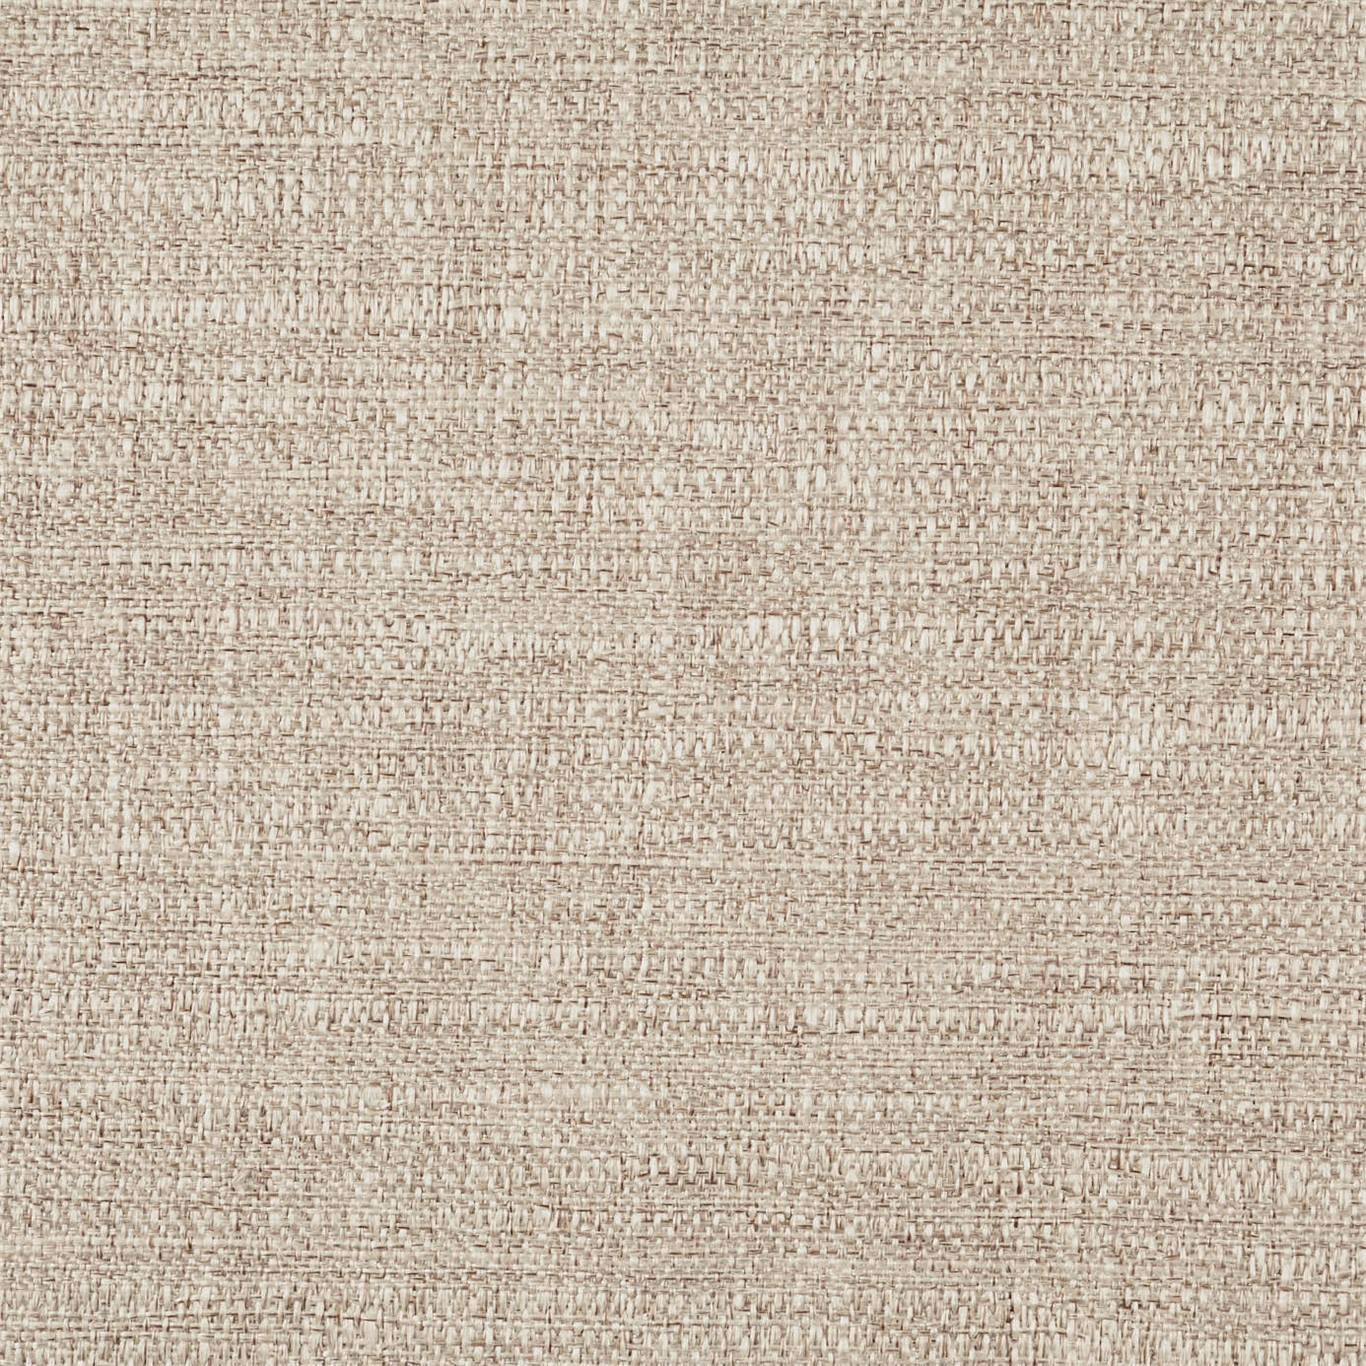 Extensive Sandstone Fabric by HAR